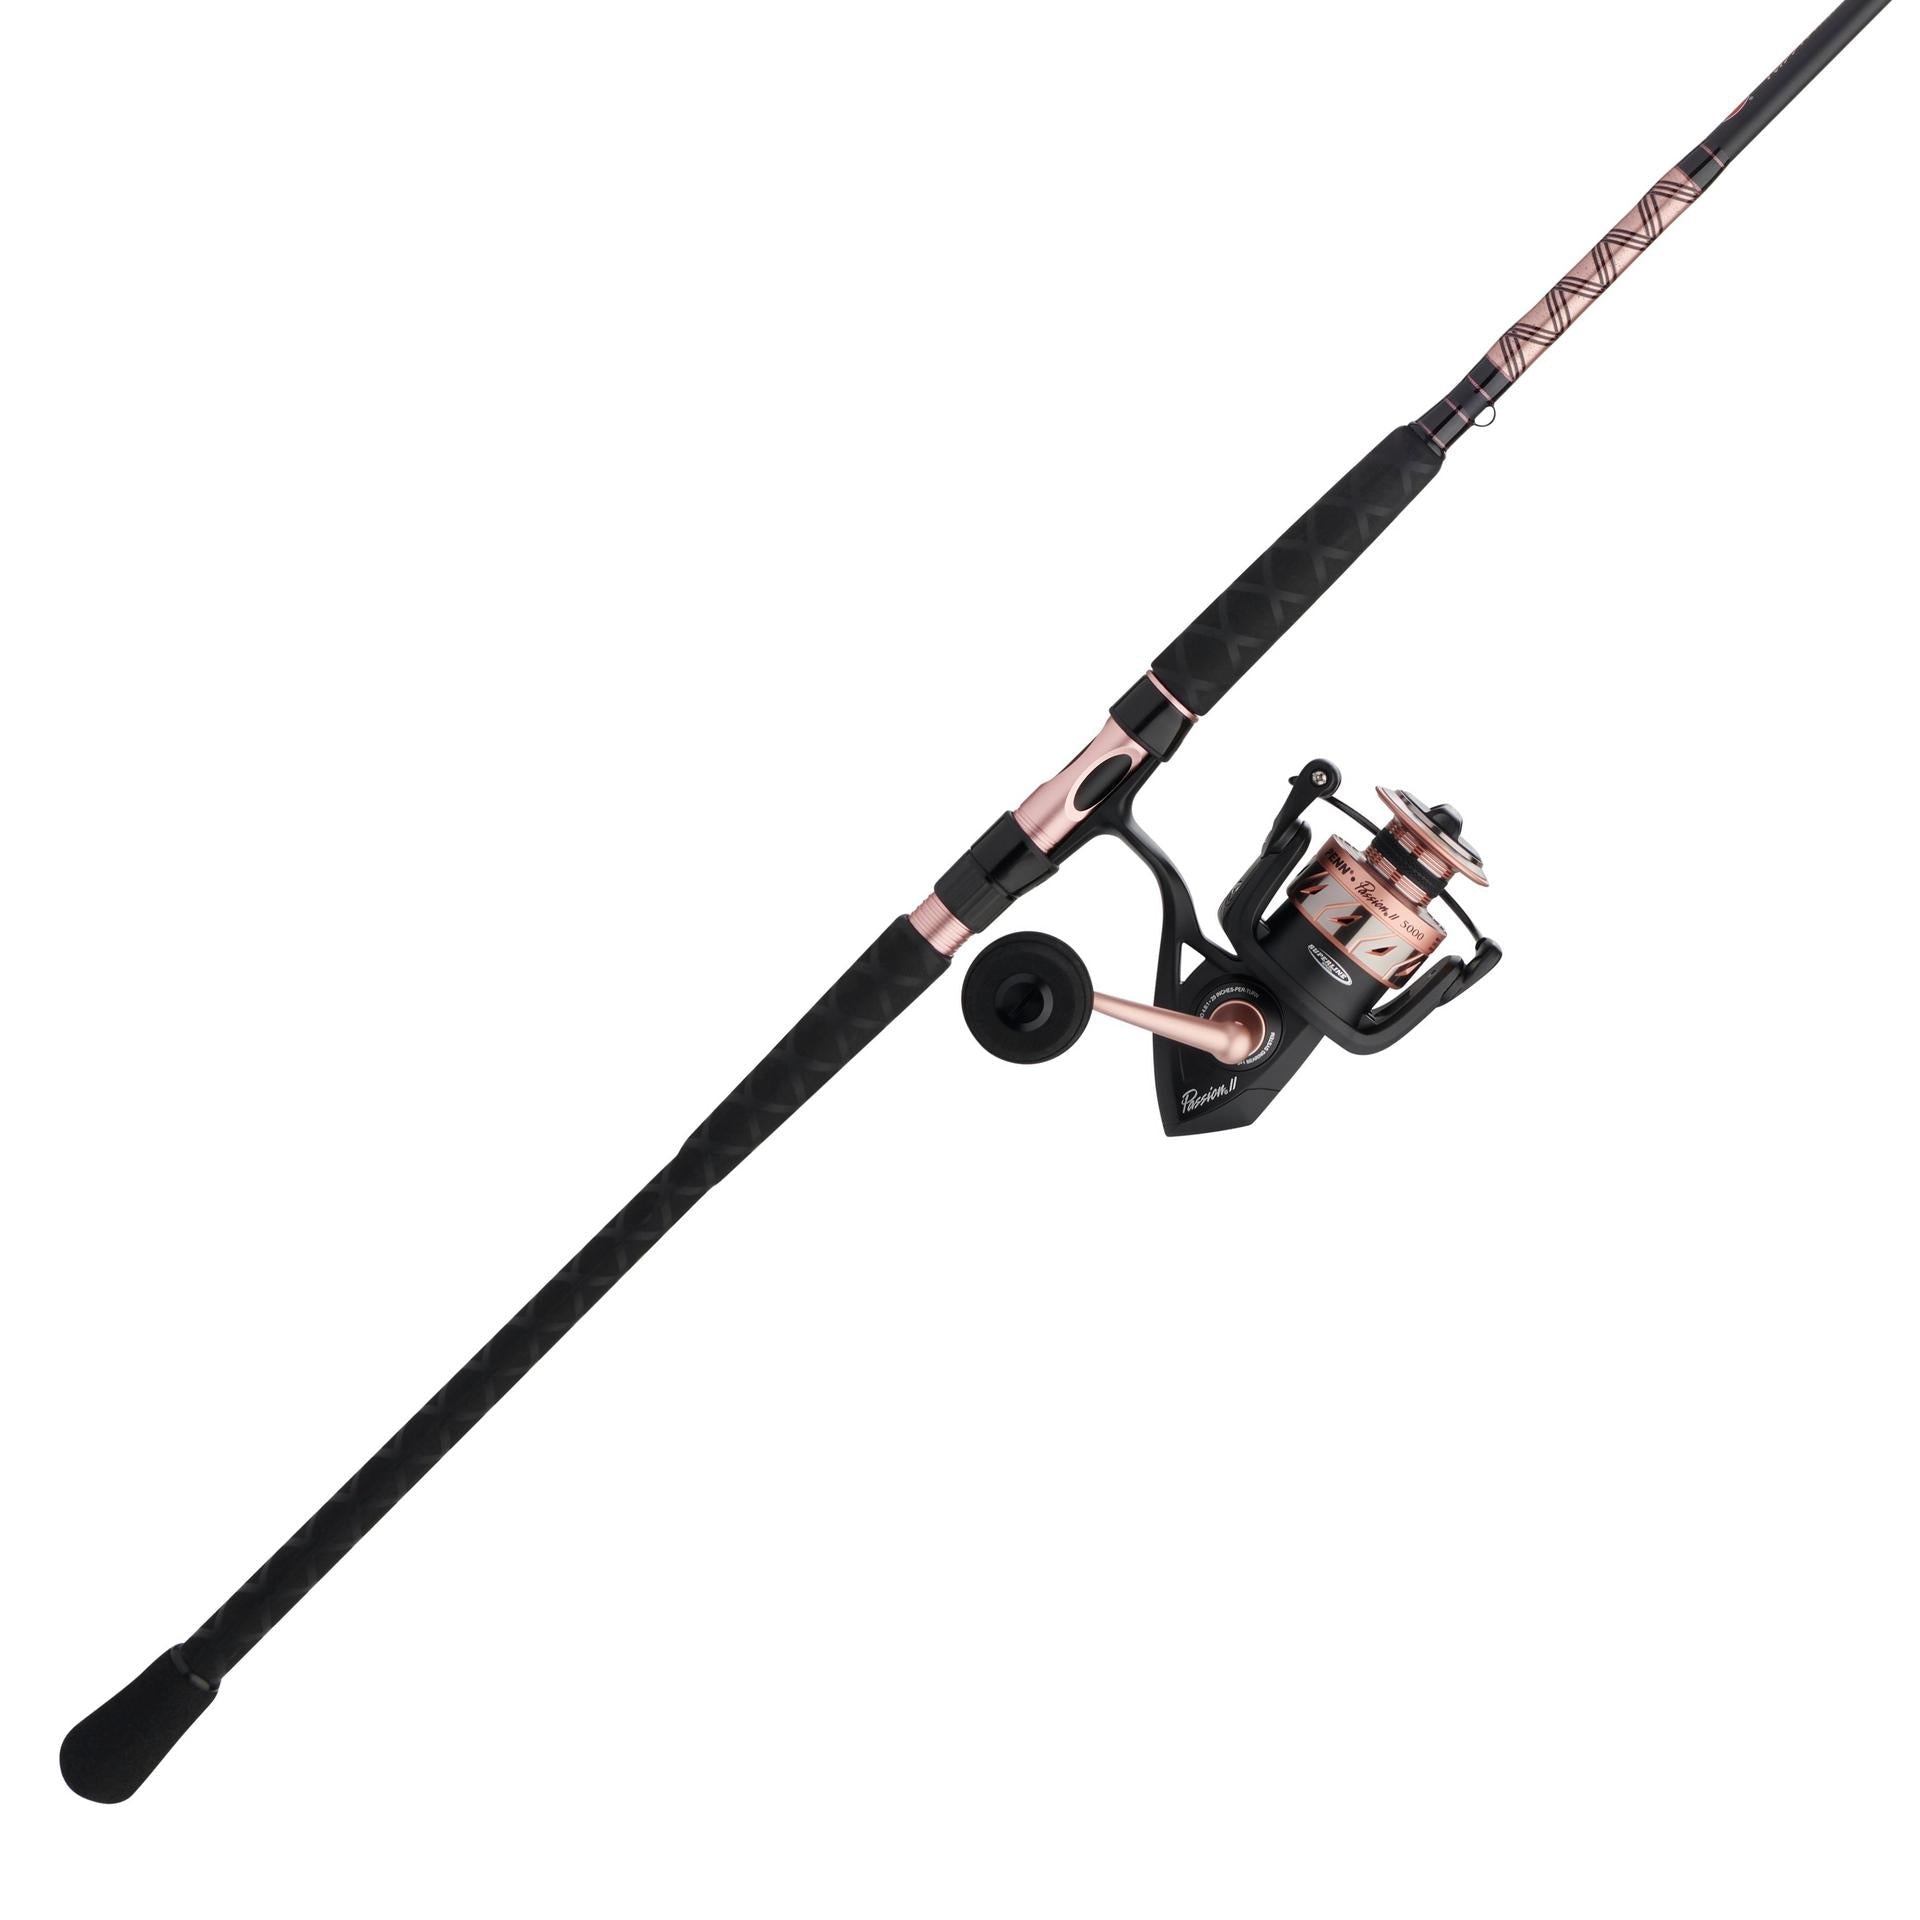 PENN 7 Ft. Wrath Fishing Rod and Reel Spinning Combo,4000 - 7